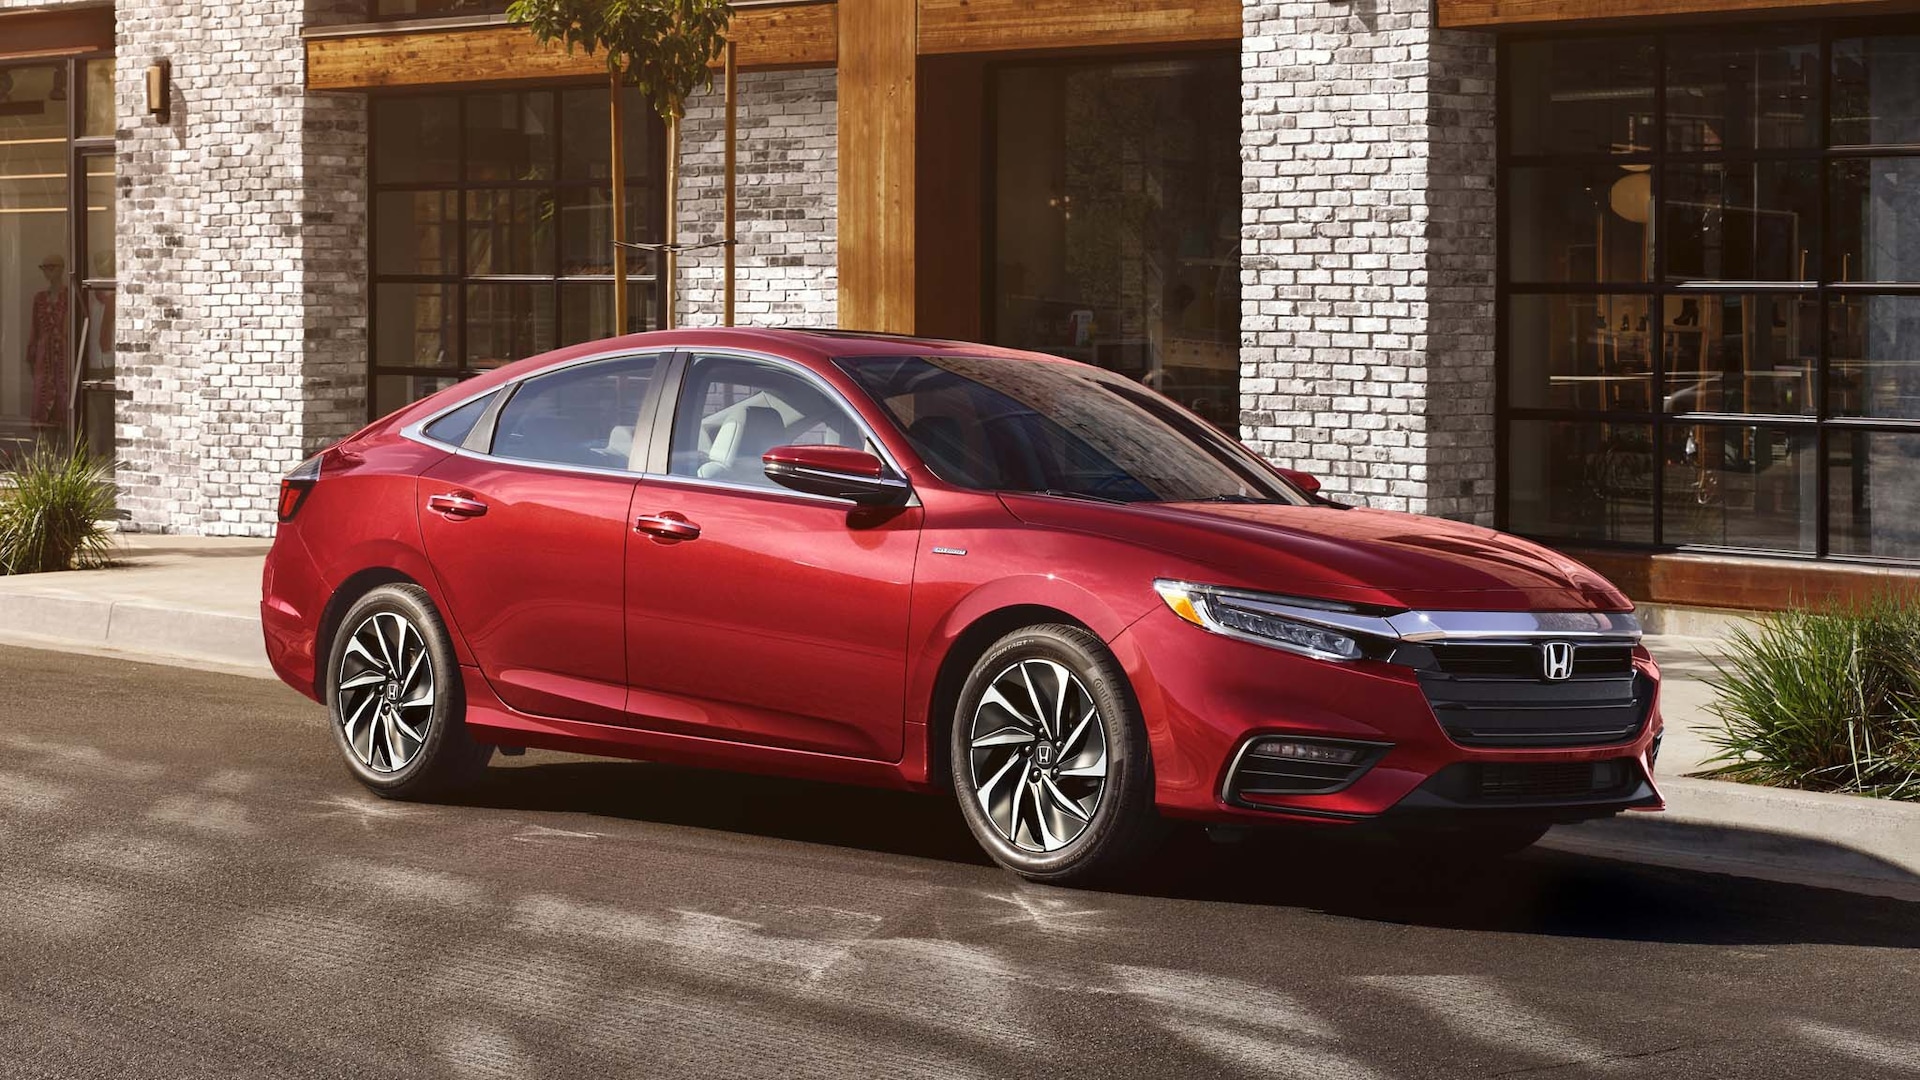 2021 Honda Insight Prices, Reviews, and Photos - MotorTrend